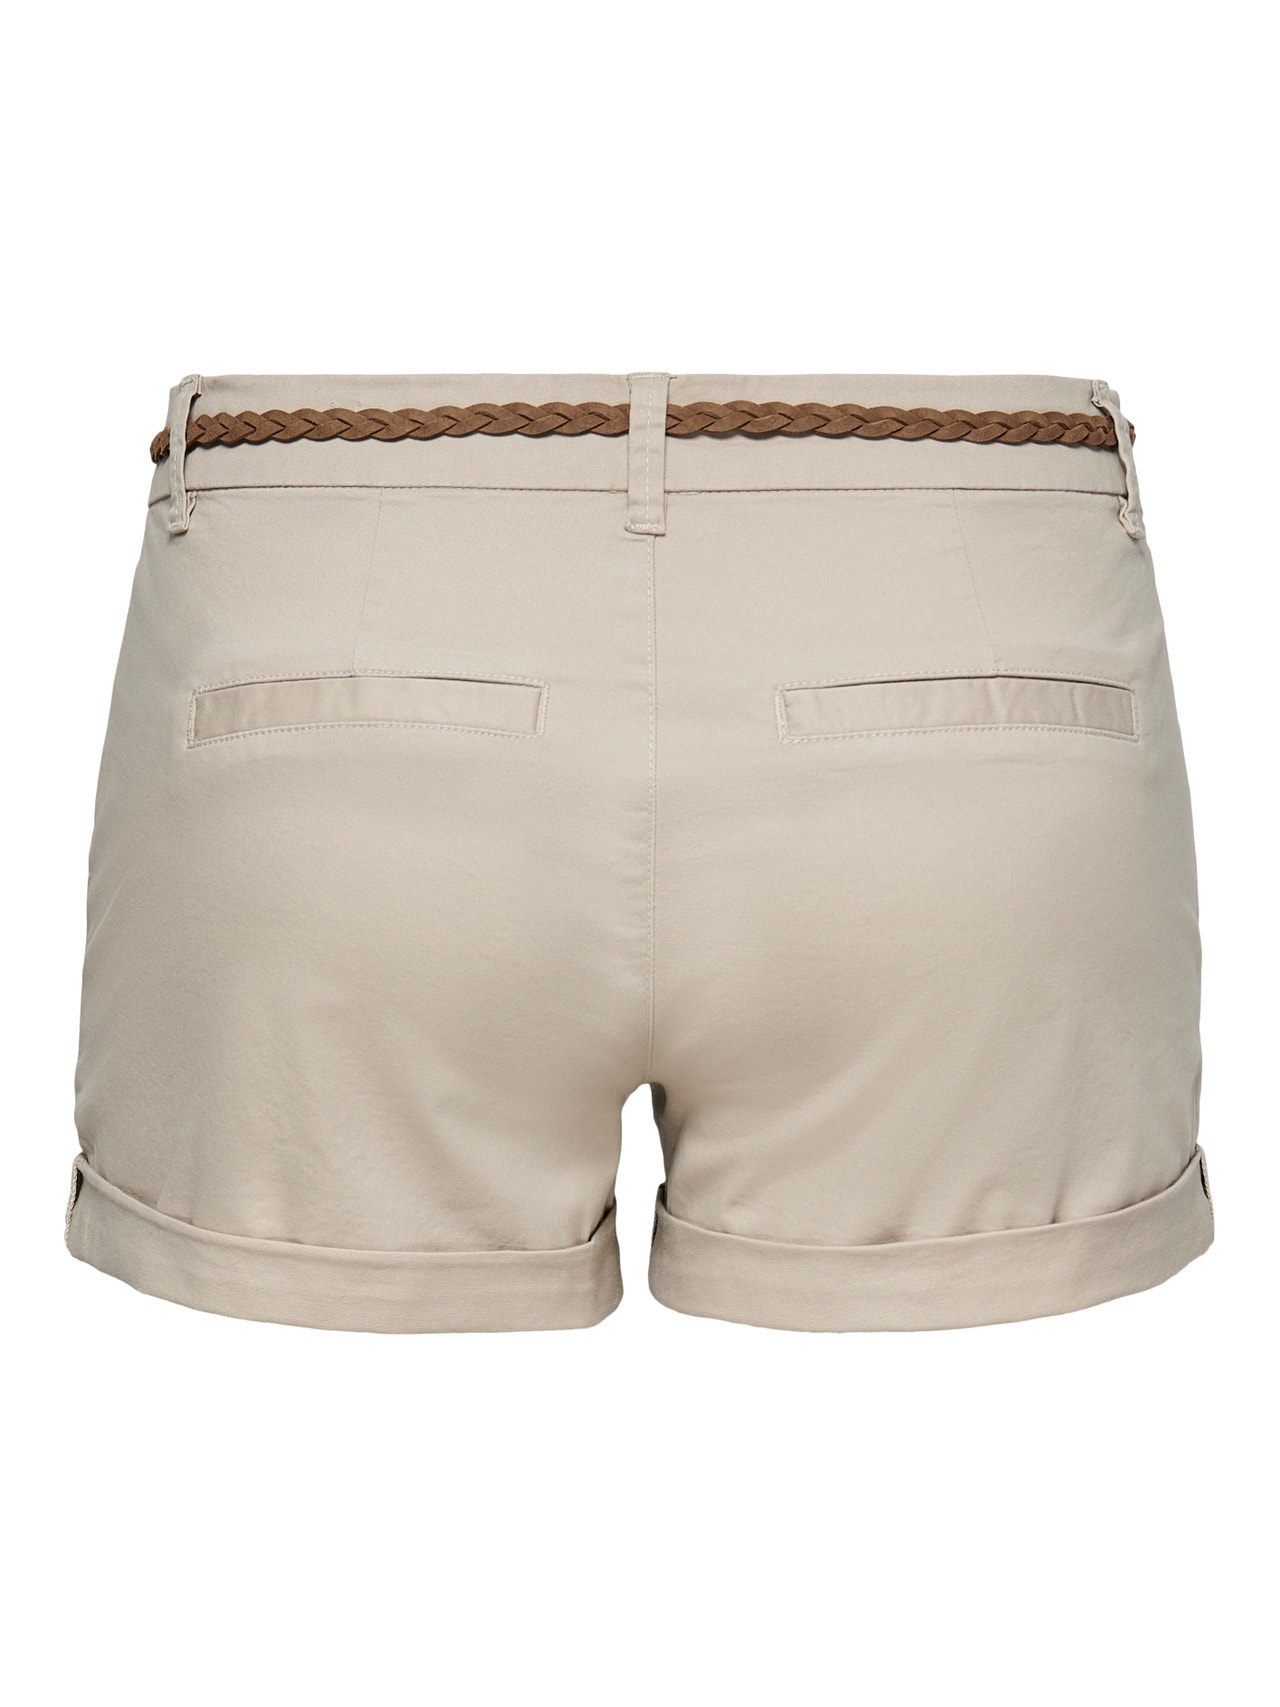 ONLY Chino shorts with belt -Pure Cashmere - 15134246